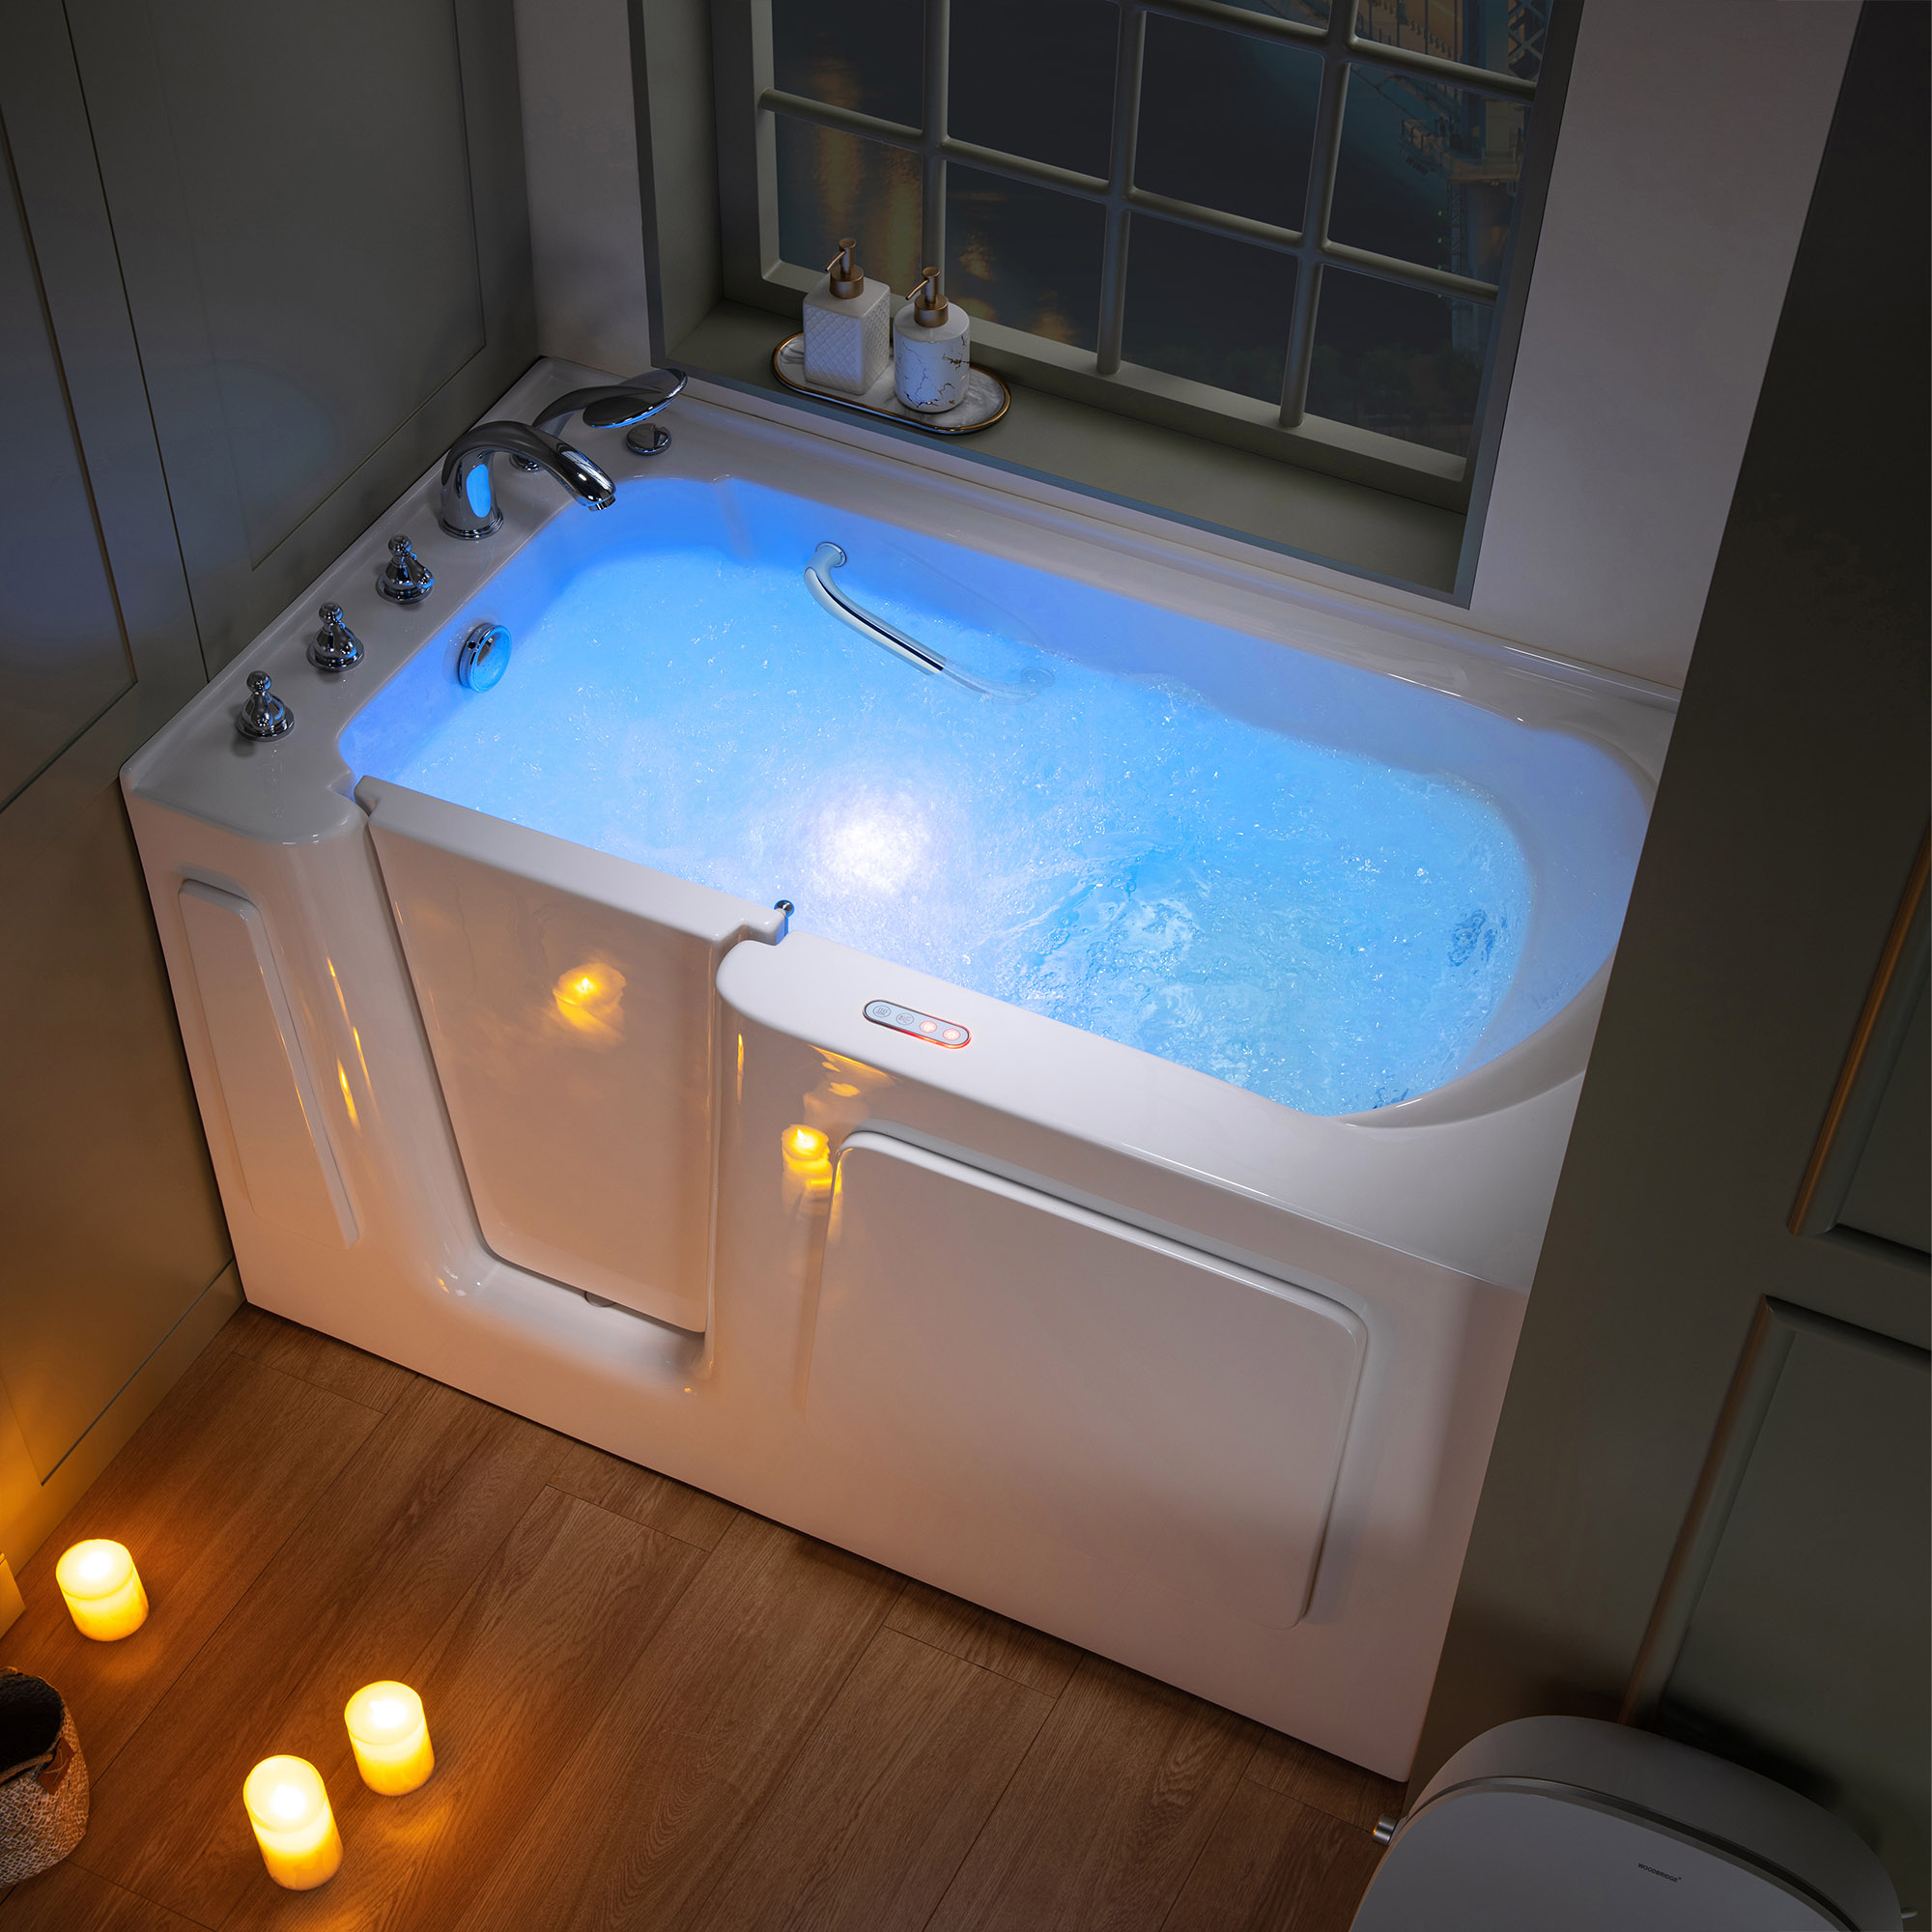  WOODBRIDGE 60 in. x 30 in. Left Hand Walk-In Air & Whirlpool Jets Hot Tub With Quick Fill Faucet with Hand Shower, White High Glass Acrylic Tub with Computer Control Panel, WB603038L_11529